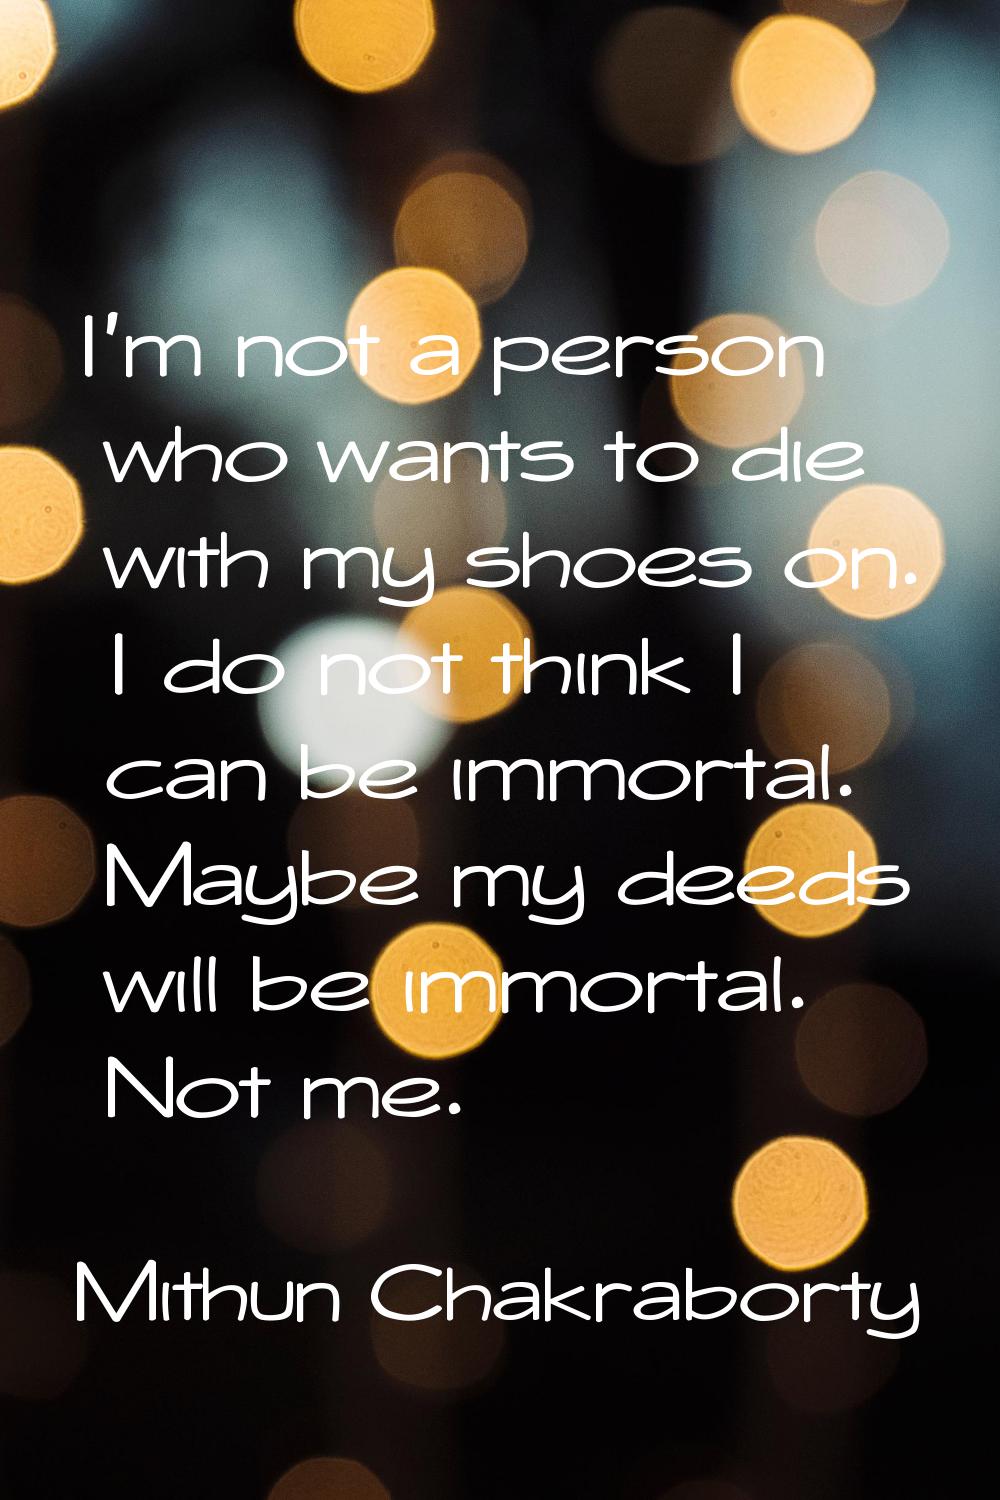 I'm not a person who wants to die with my shoes on. I do not think I can be immortal. Maybe my deed